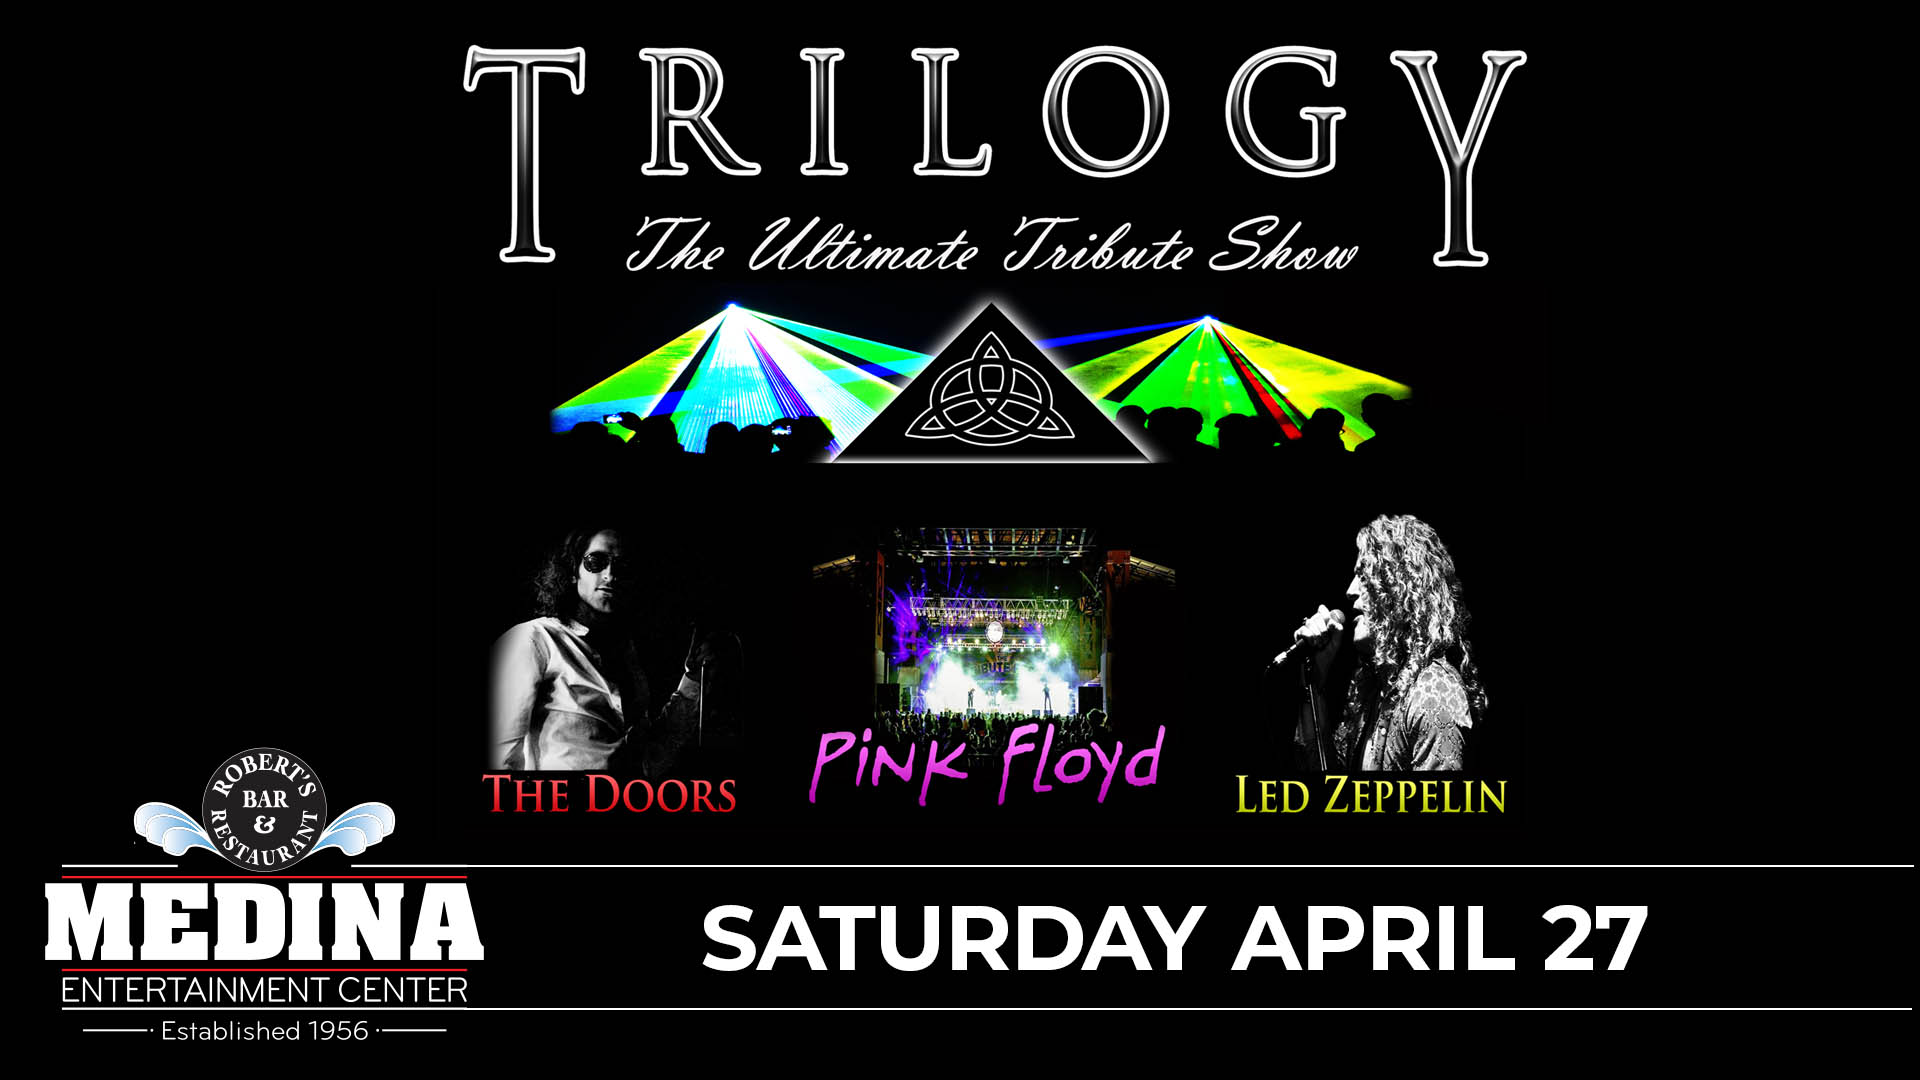 TRILOGY The Ultimate Tribute Show to The Doors, Led Zeppelin and Pink Floyd Medina Entertainment Center Saturday, April 27, 2024 Doors: 7:00PM | Music: 8:00PM | 21+ Tickets on-sale Friday, February 2 at 11AM Gold Reserved $39 / Silver Reserved $34 / General Seating $29 plus applicable fees